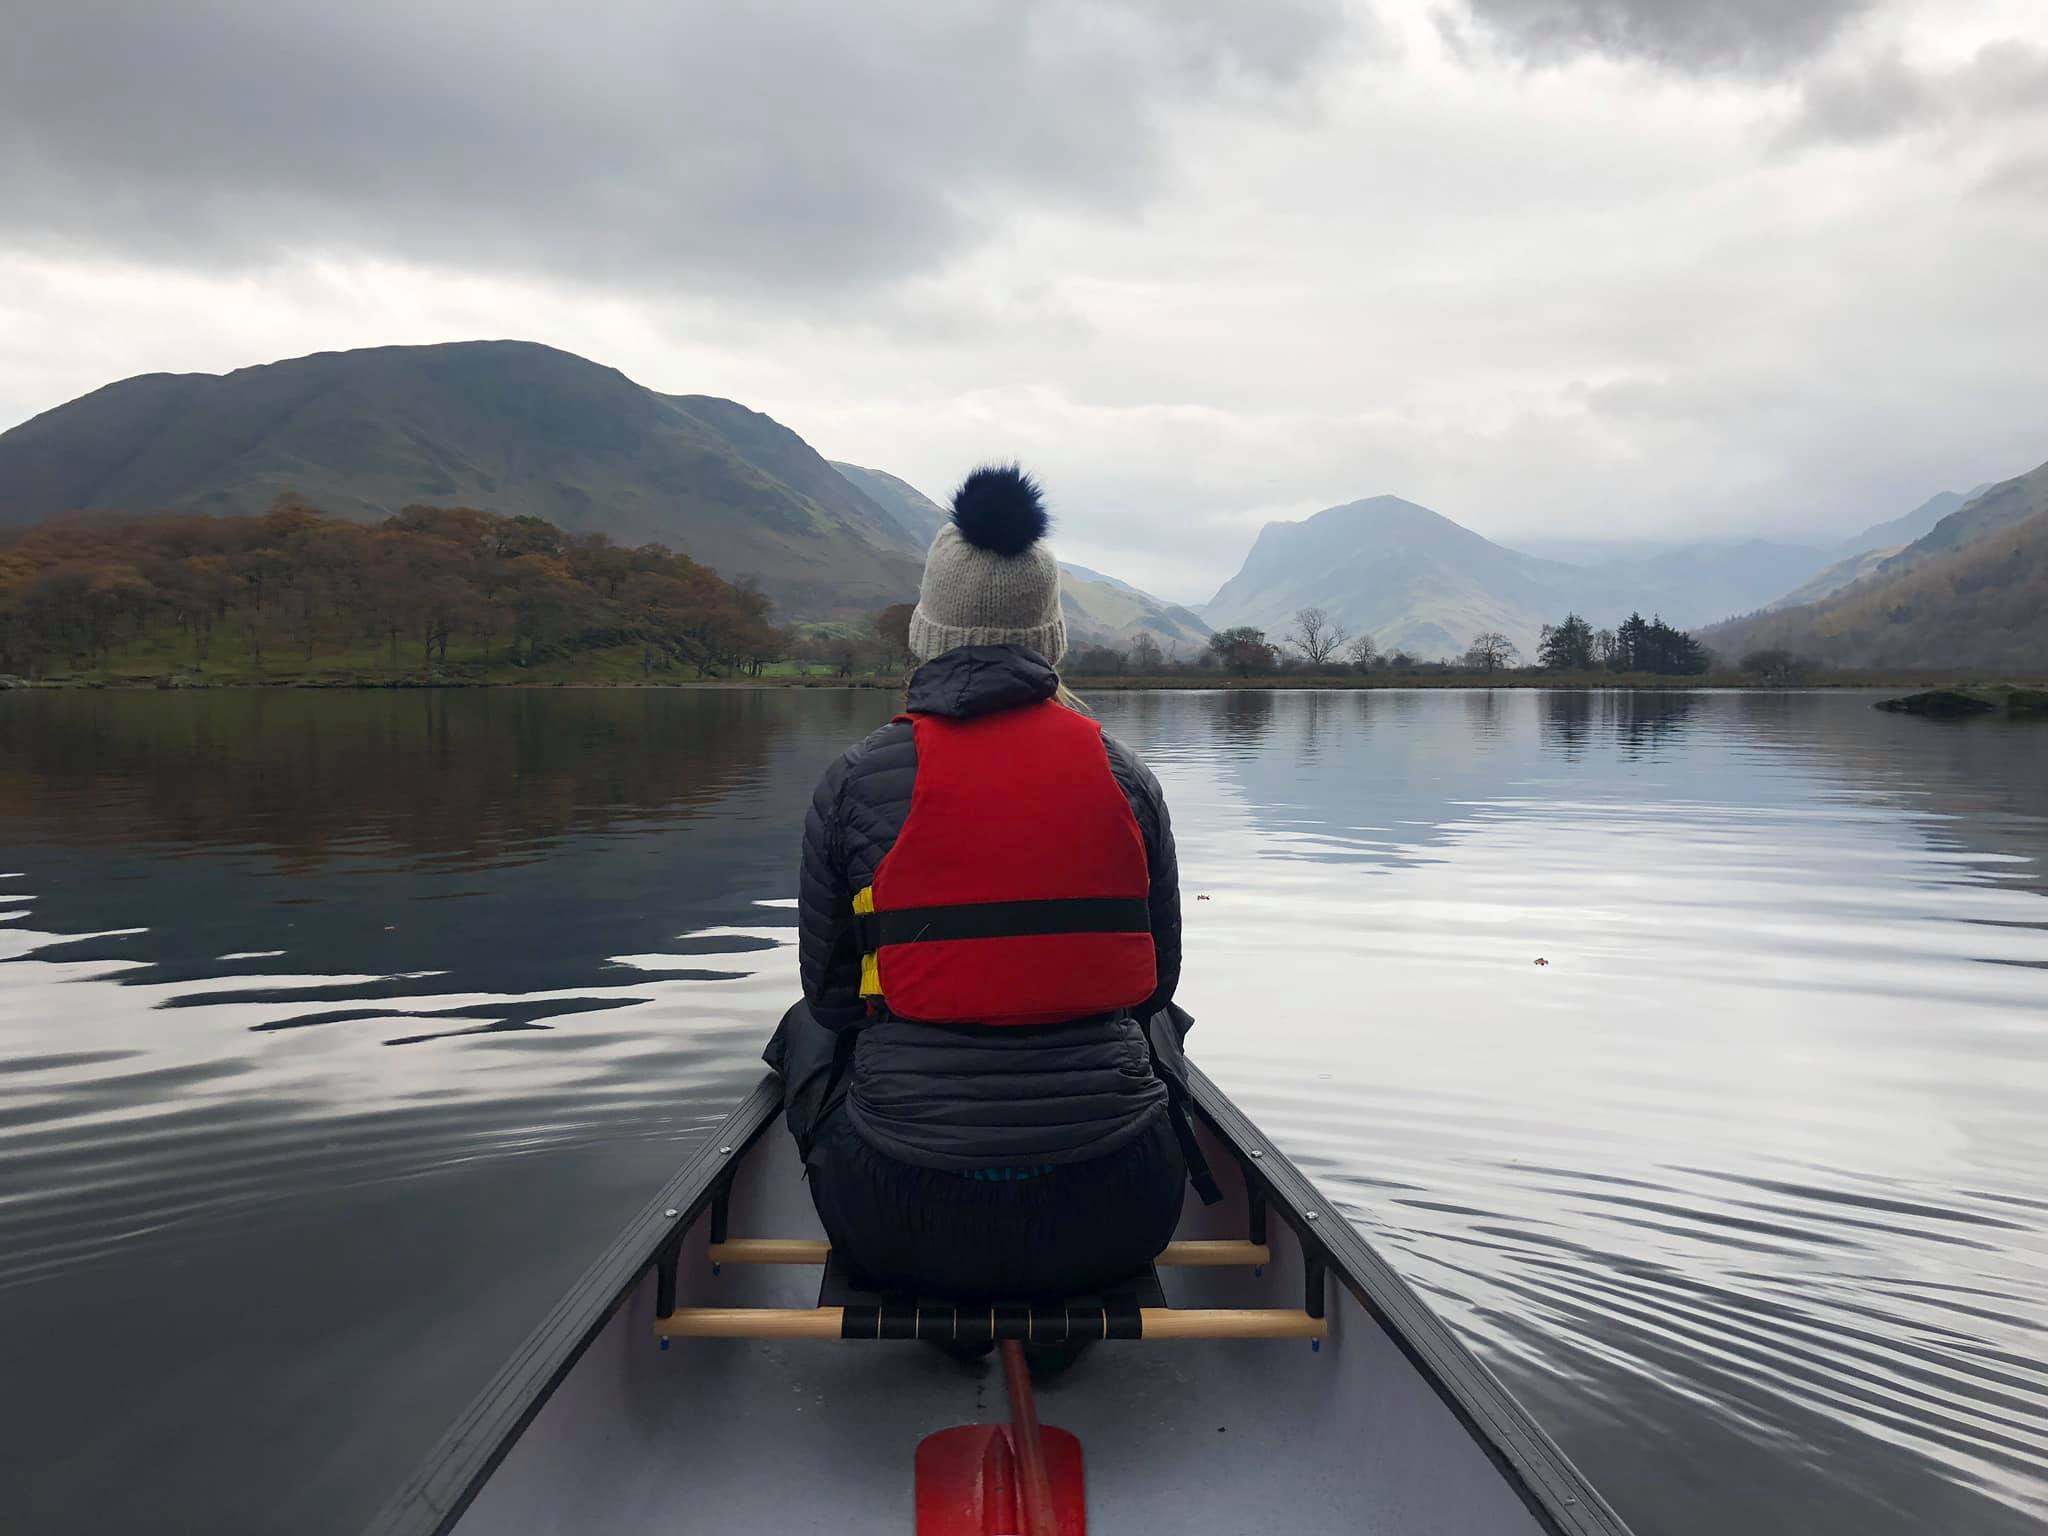 Canoeing on Crummock Water in the Lake District